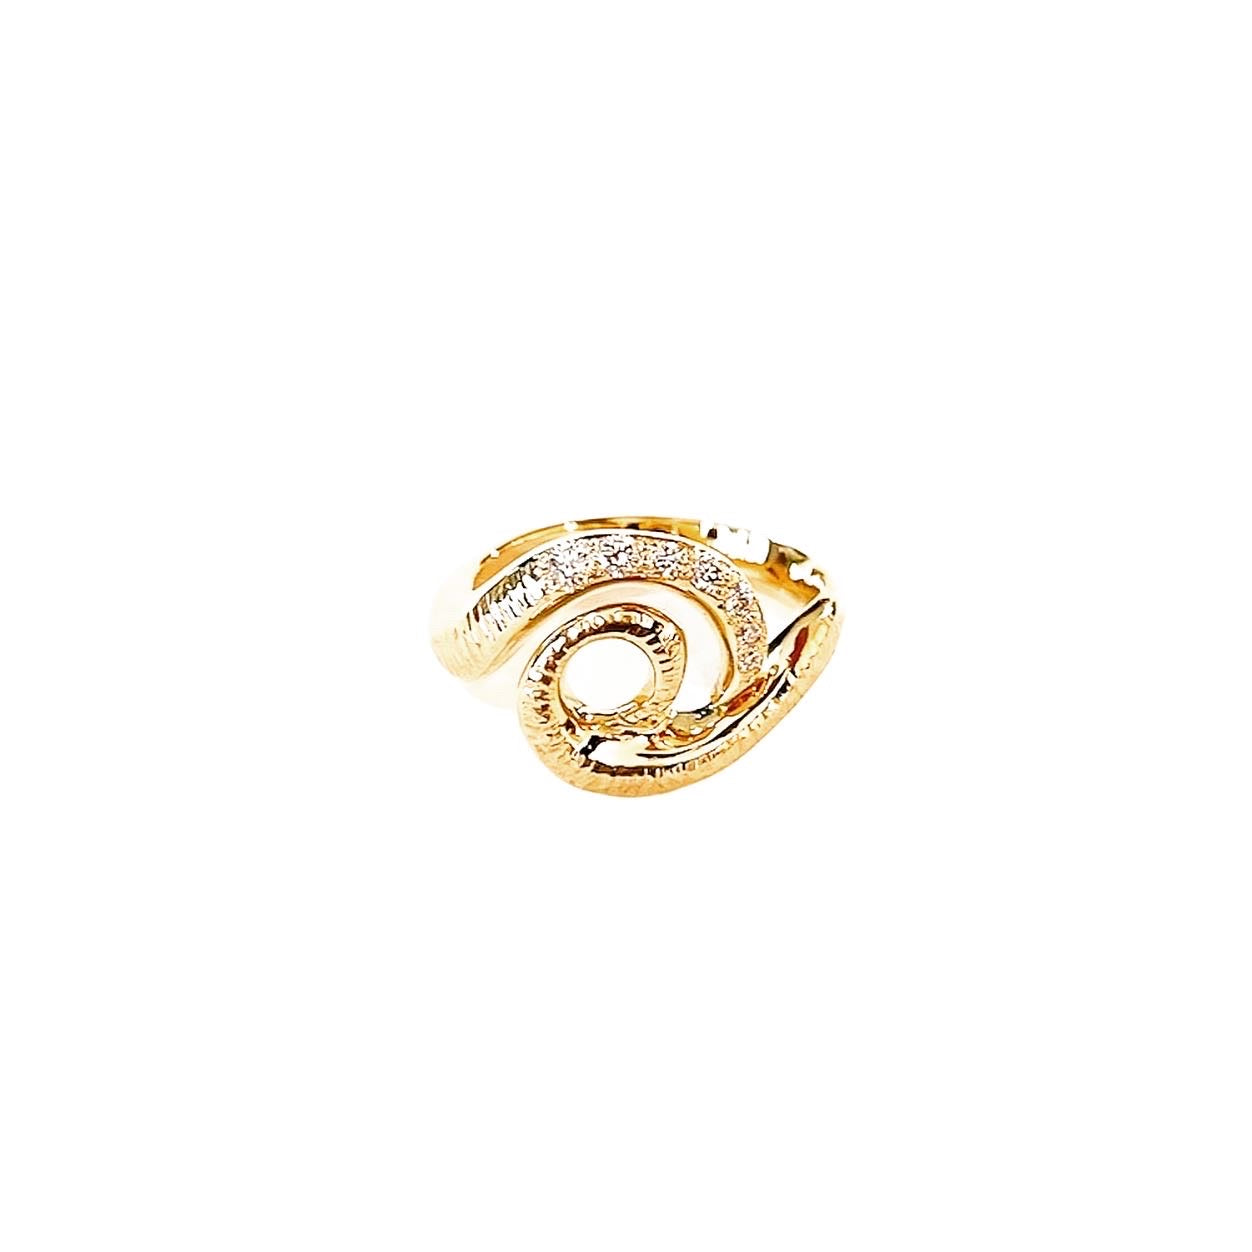 Surrea 14 kt gold diamond ring, top view.